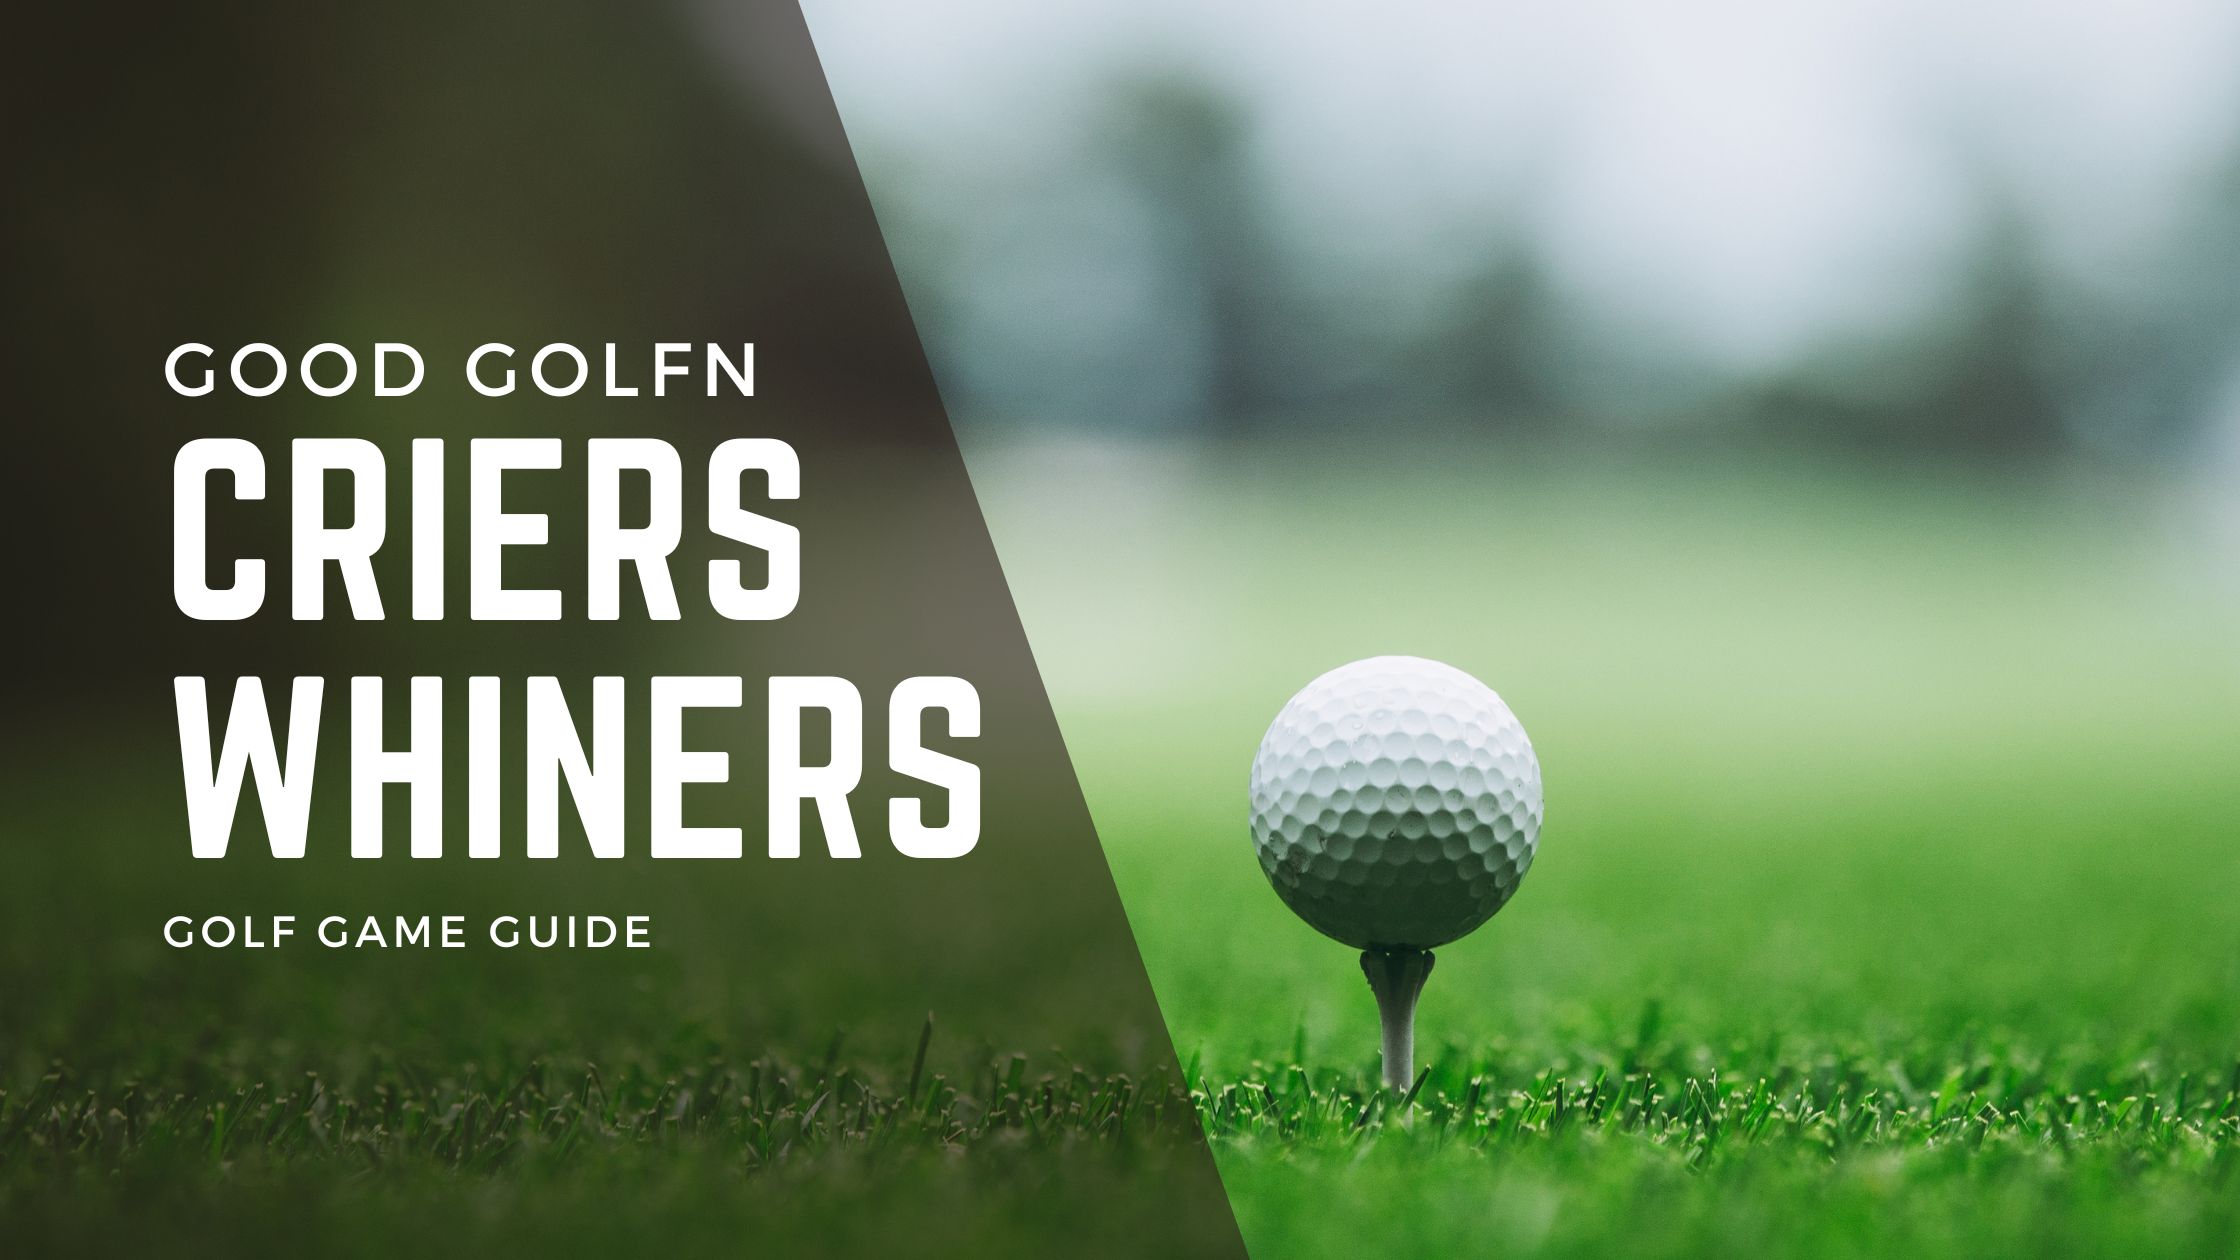 Unlock golf's secrets with our guide on popular games like criers and whiners golf, mastering your swing, and understanding scoring.